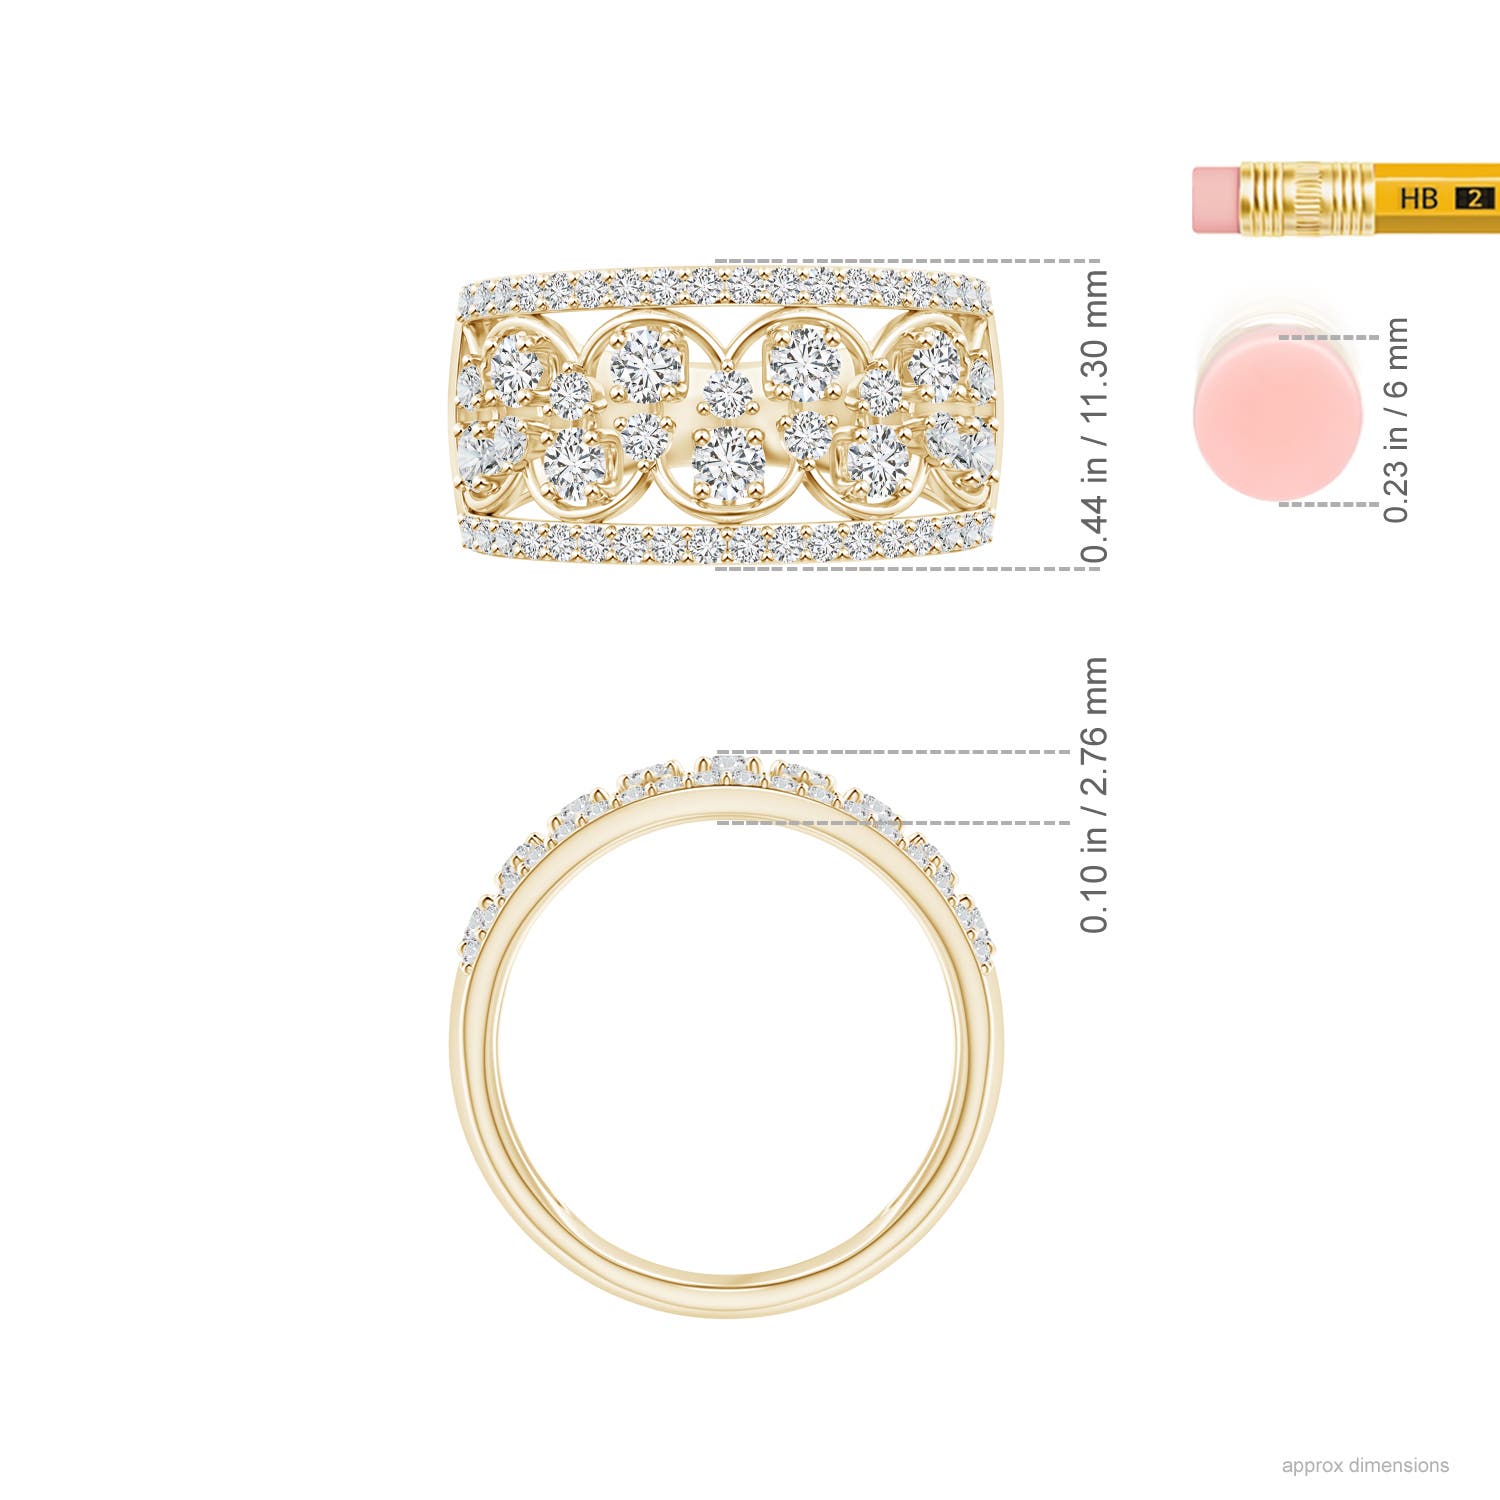 H, SI2 / 1.19 CT / 14 KT Yellow Gold